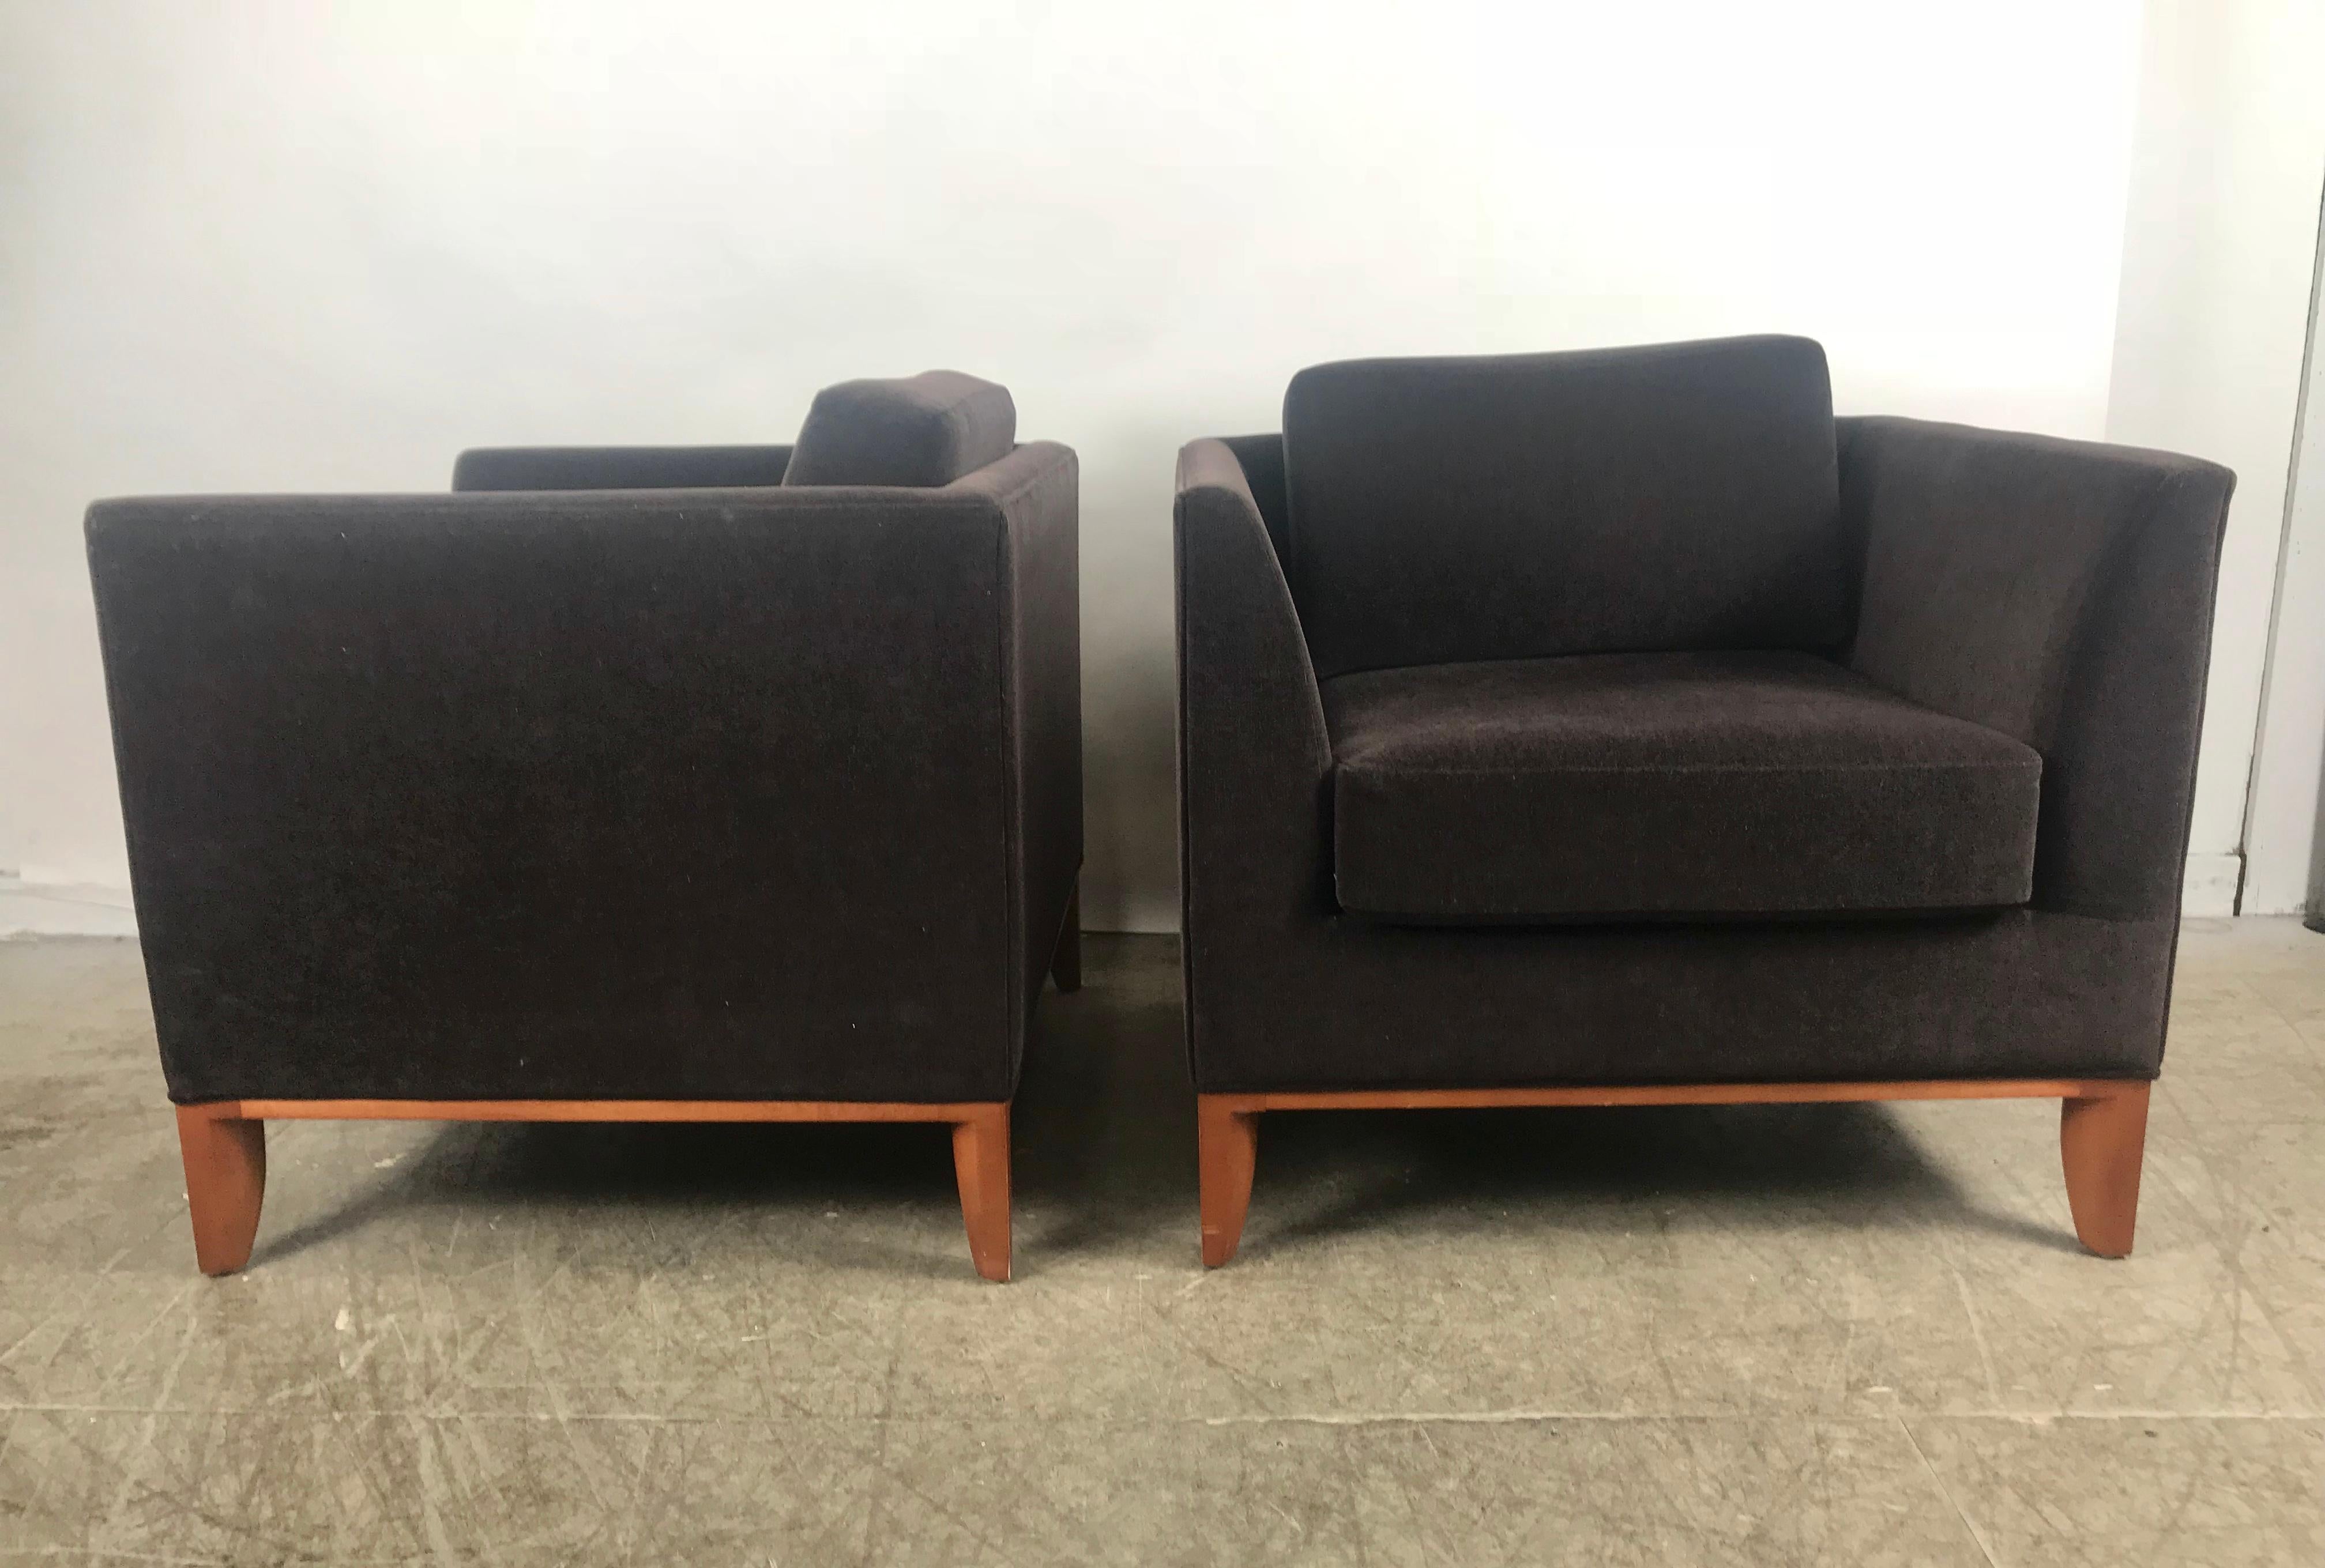 20th Century Stunning Pair of Mohair Contemporary Cube Lounge Chairs, Rembrandt Design